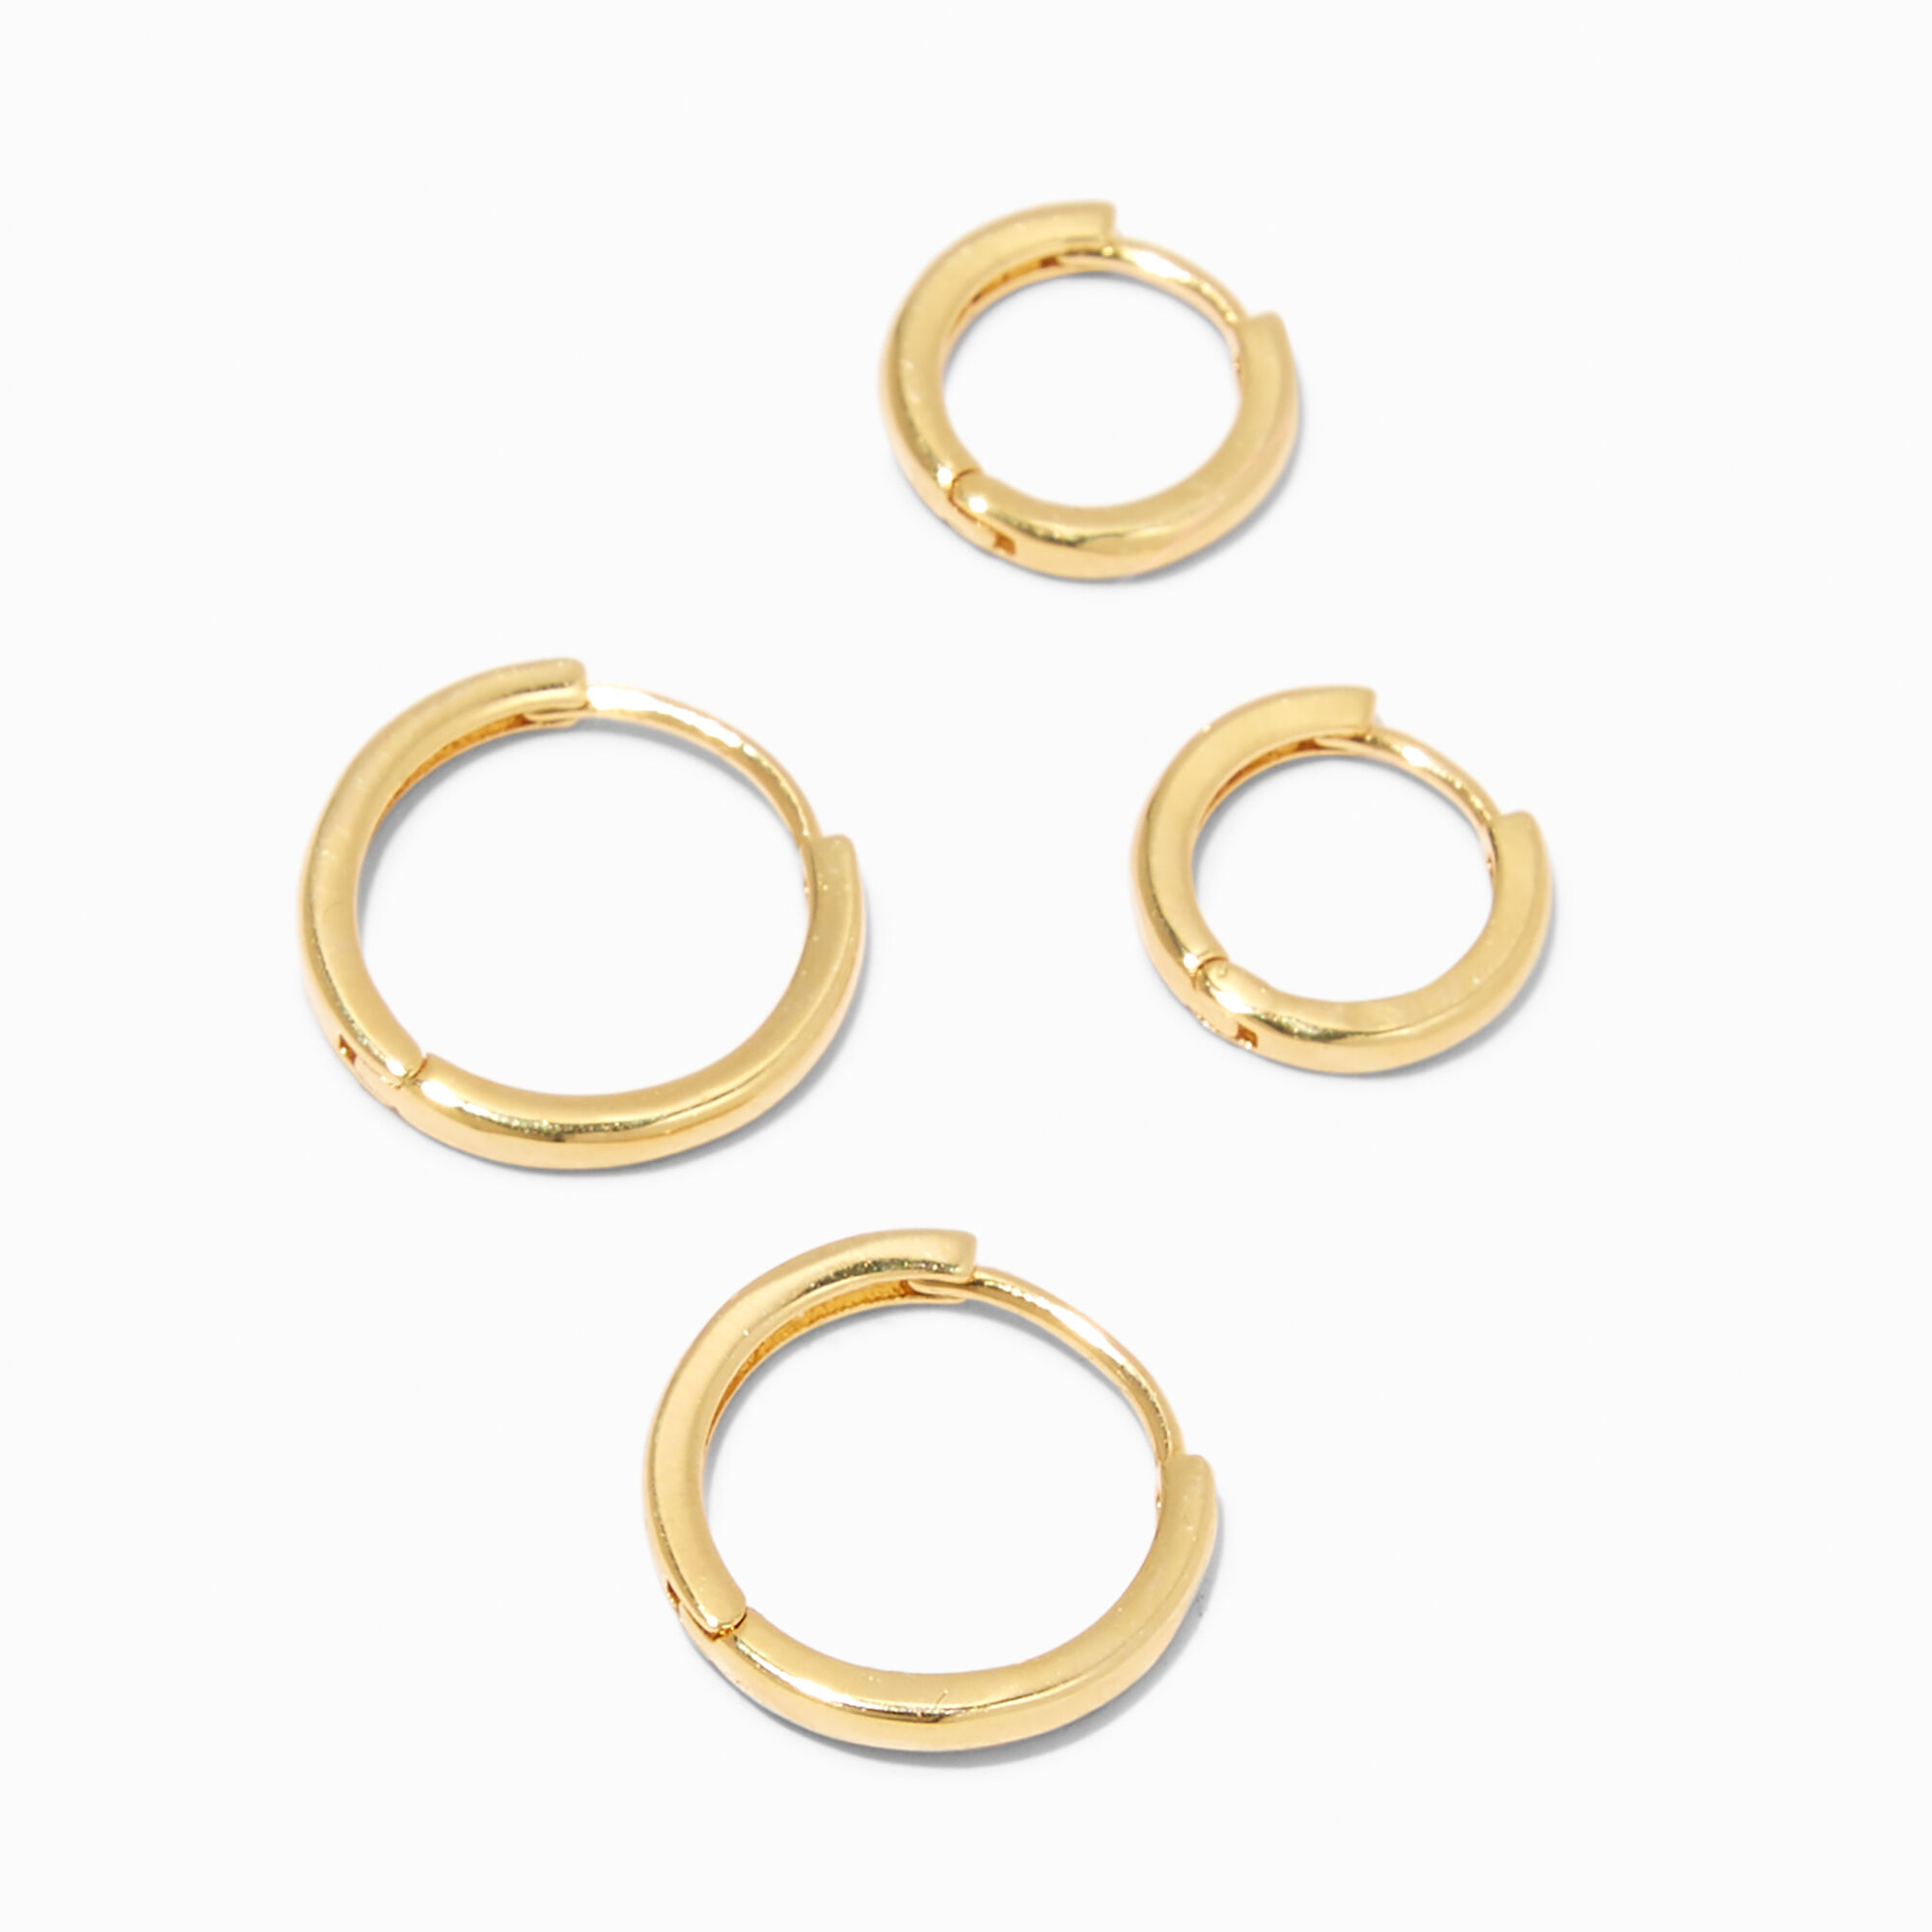 View Claires 18K Plated 8MM 12MM Hoop Earrings 2 Pack Gold information